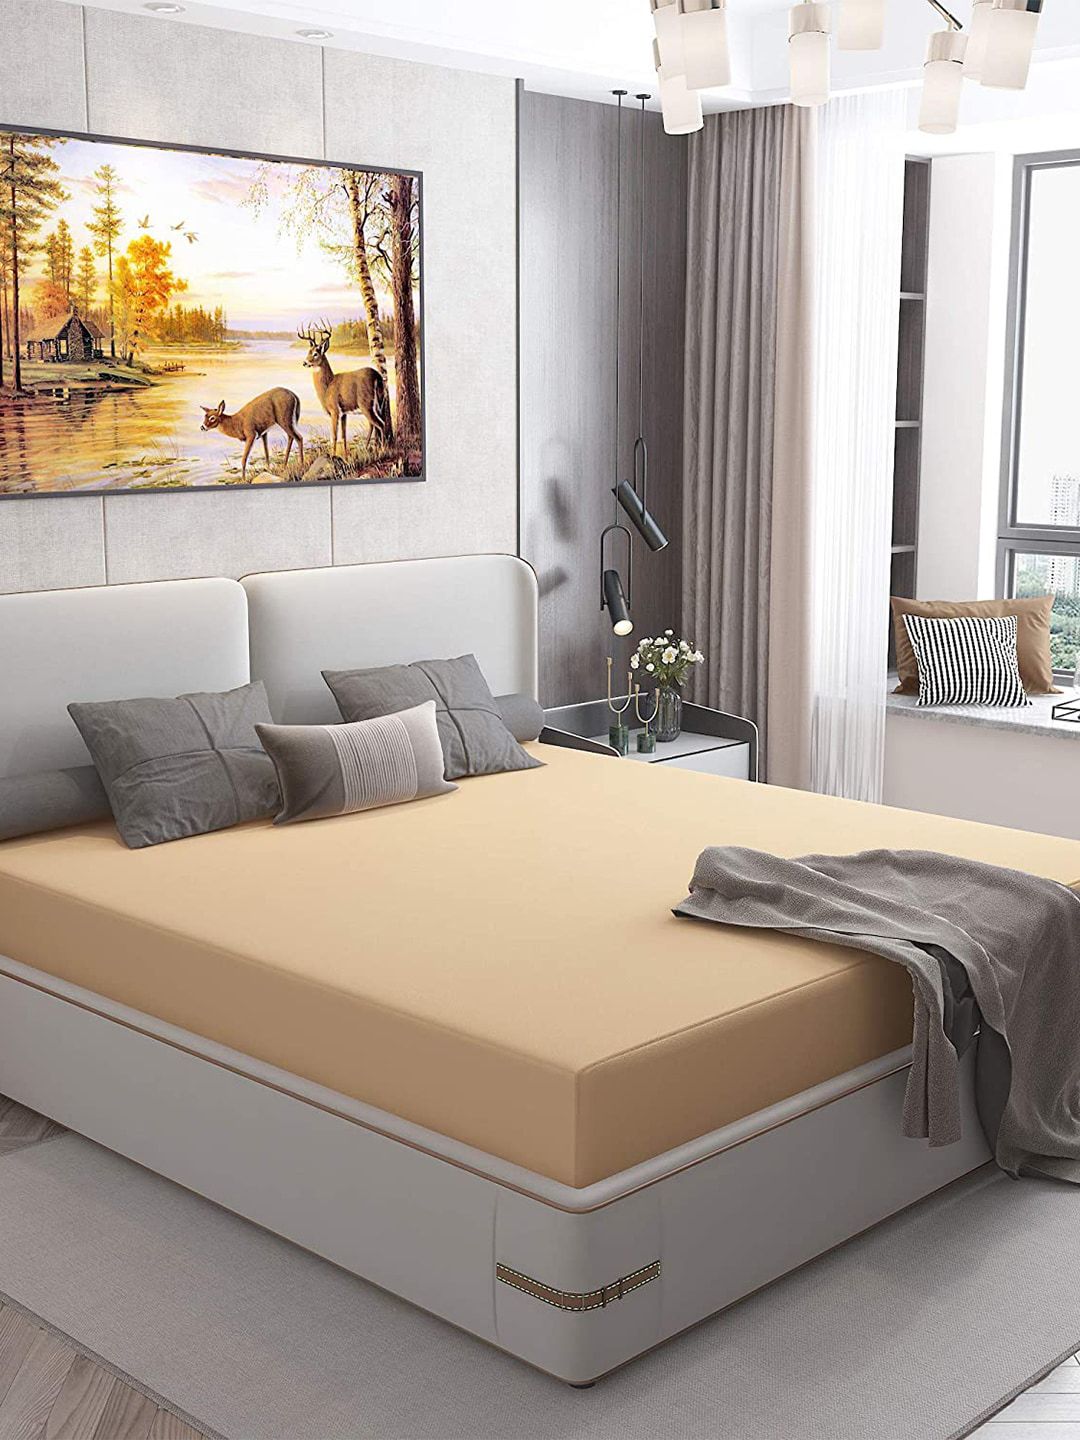 Hammer Home Beige King Size Water Proof Mattress Protector Price in India